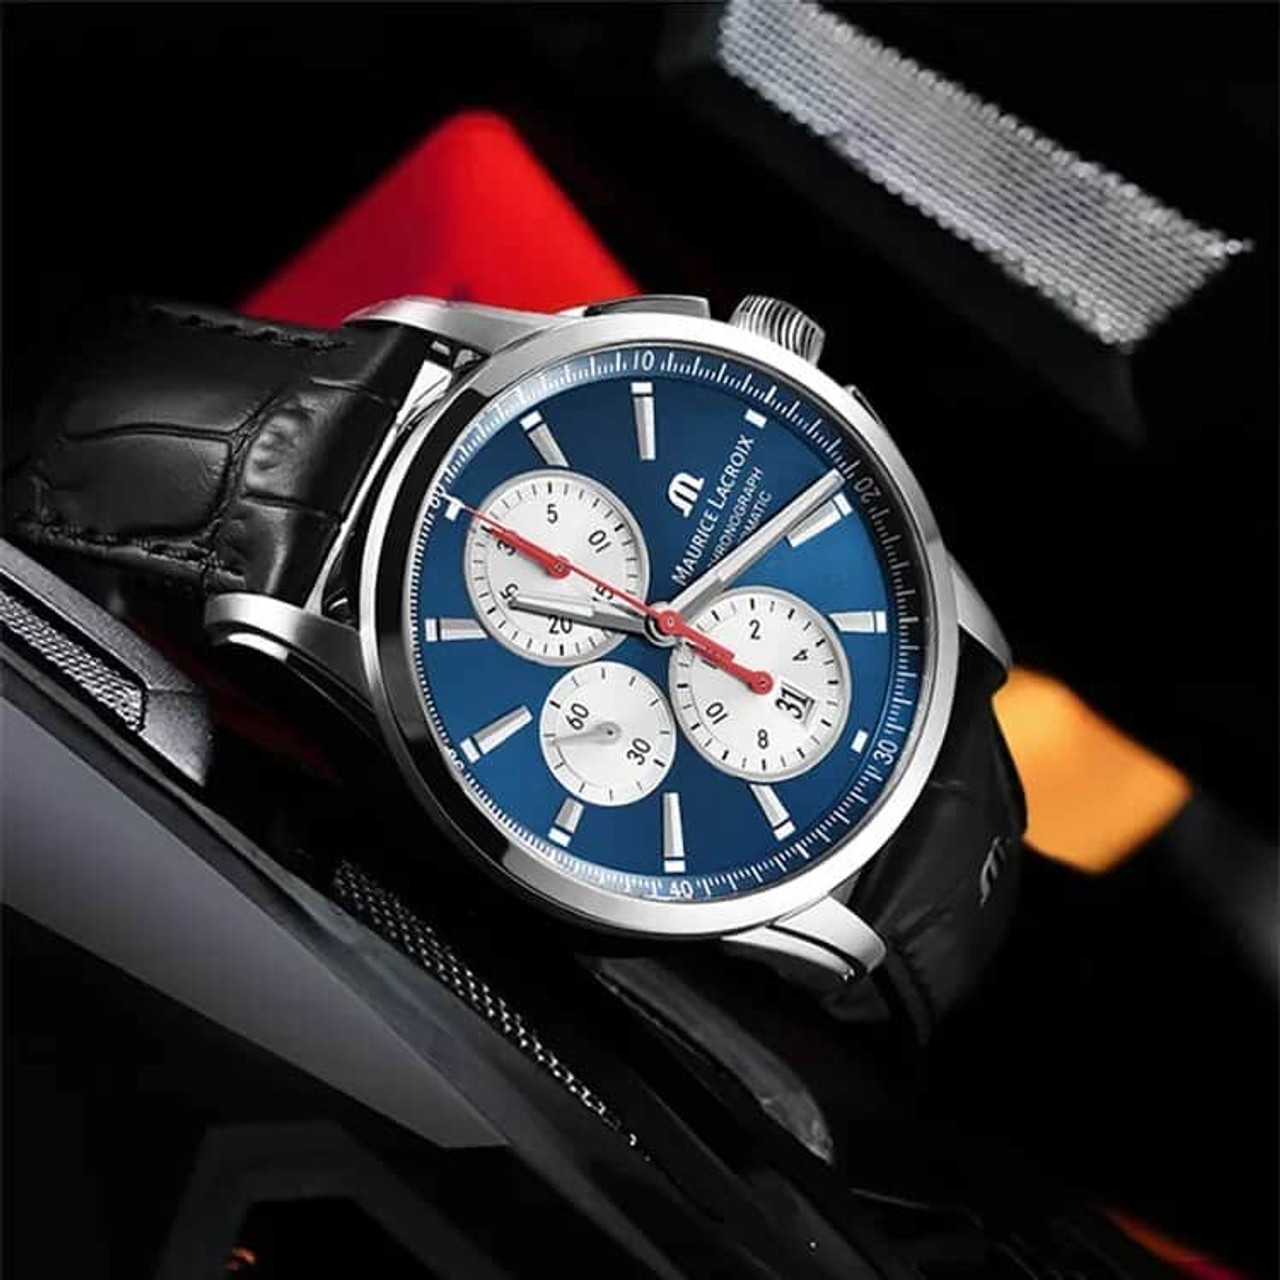 MAURICE LACROIX Watch Ben Tao Series Three-eye Chronograph Fashion Casual  Luxury Leather Men’s Watch  Relogios Masculinos